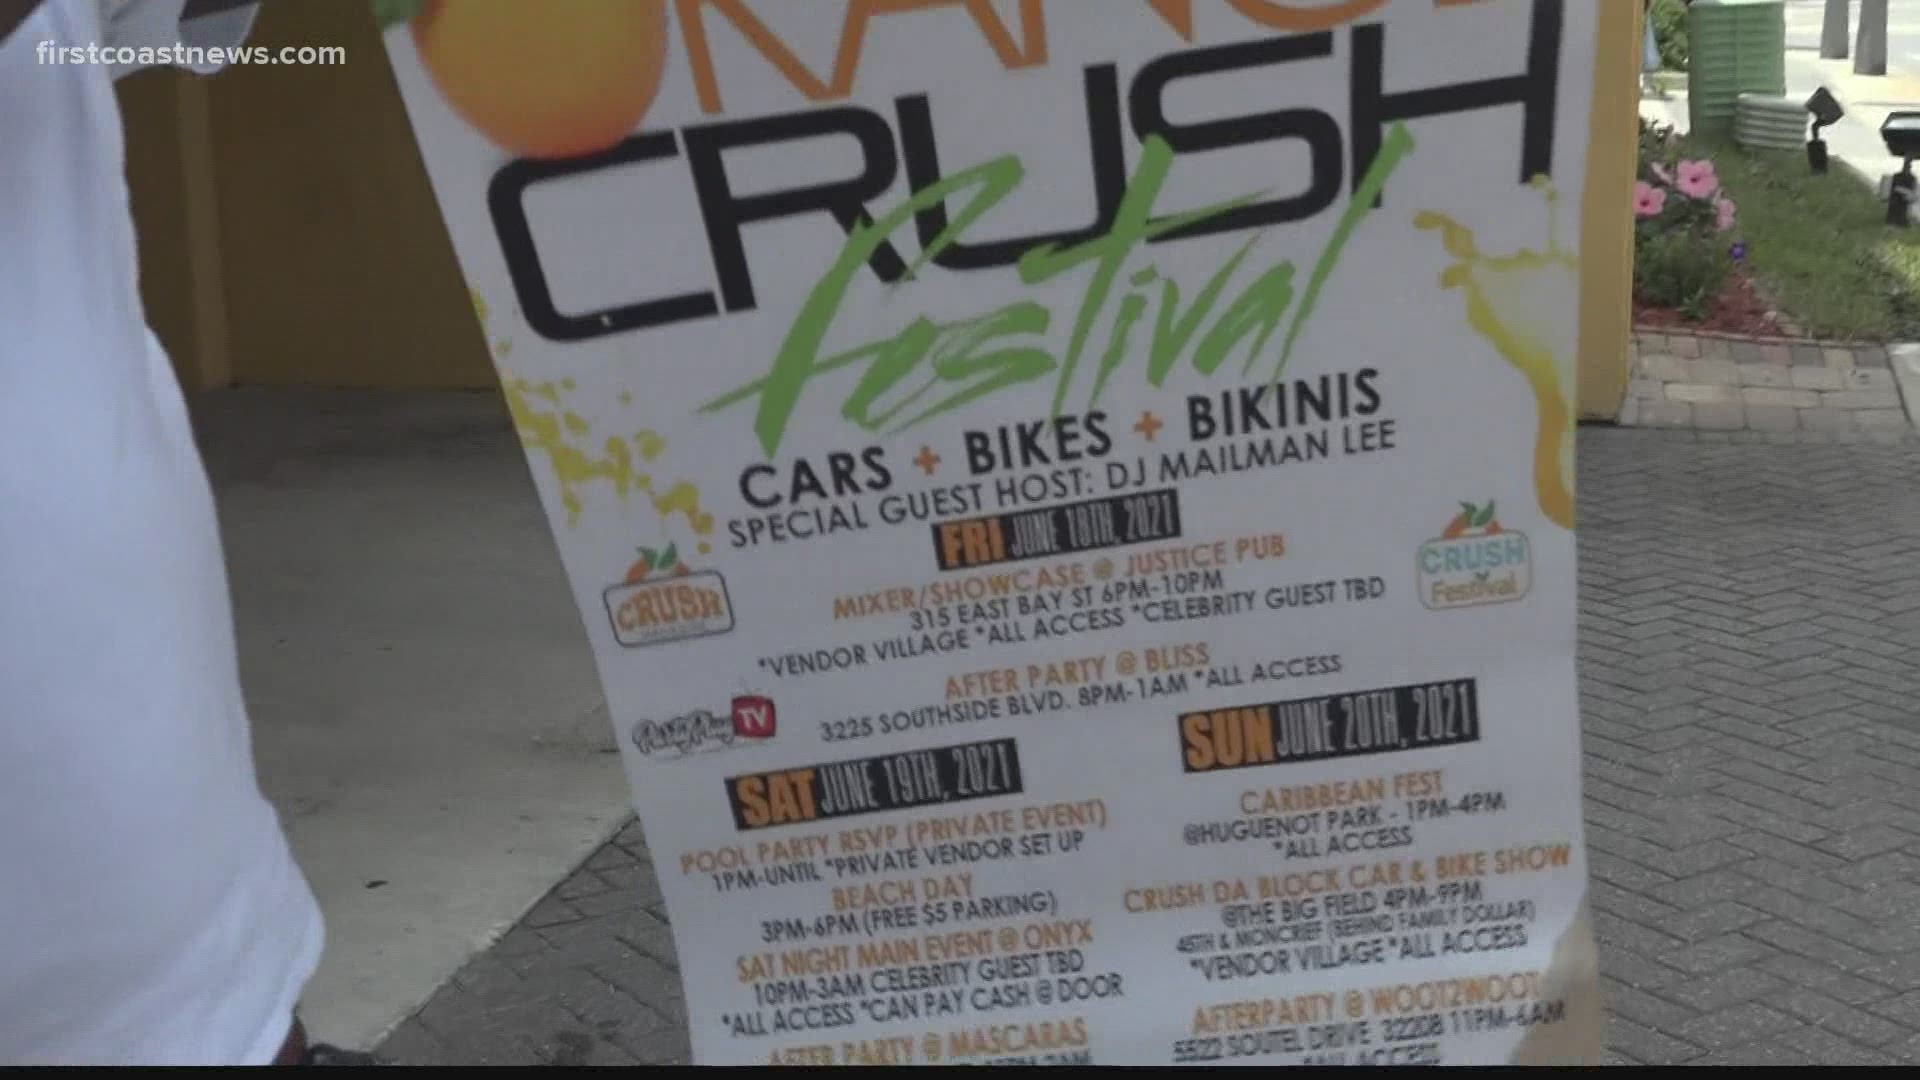 The festival is expected to draw 20,000 people with party events around Jacksonville and its beaches.